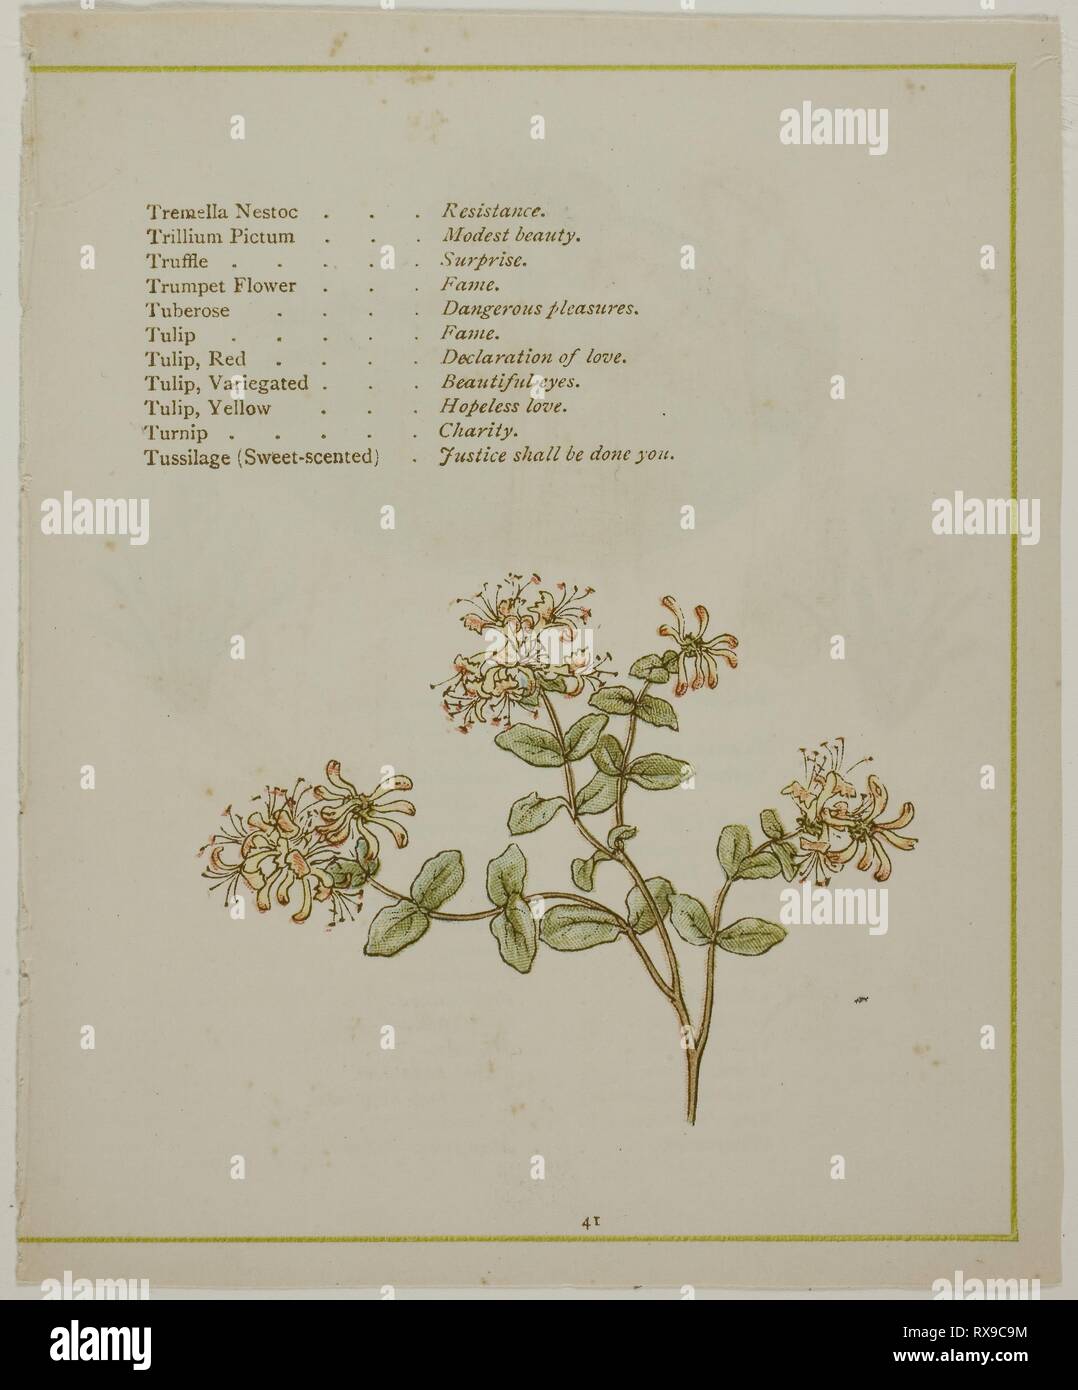 Valerian Through Volkamenia, from The Illuminated Language of Flowers. probably Edmund Evans (English, 1826-1905); after Kate Greenaway (English, 1846-1901); printed by Edmund Evans. Date: 1884. Dimensions: . Color wood engraving (chromoxylograph) reproduction of a watercolor on paper. Origin: England. Museum: The Chicago Art Institute. Stock Photo